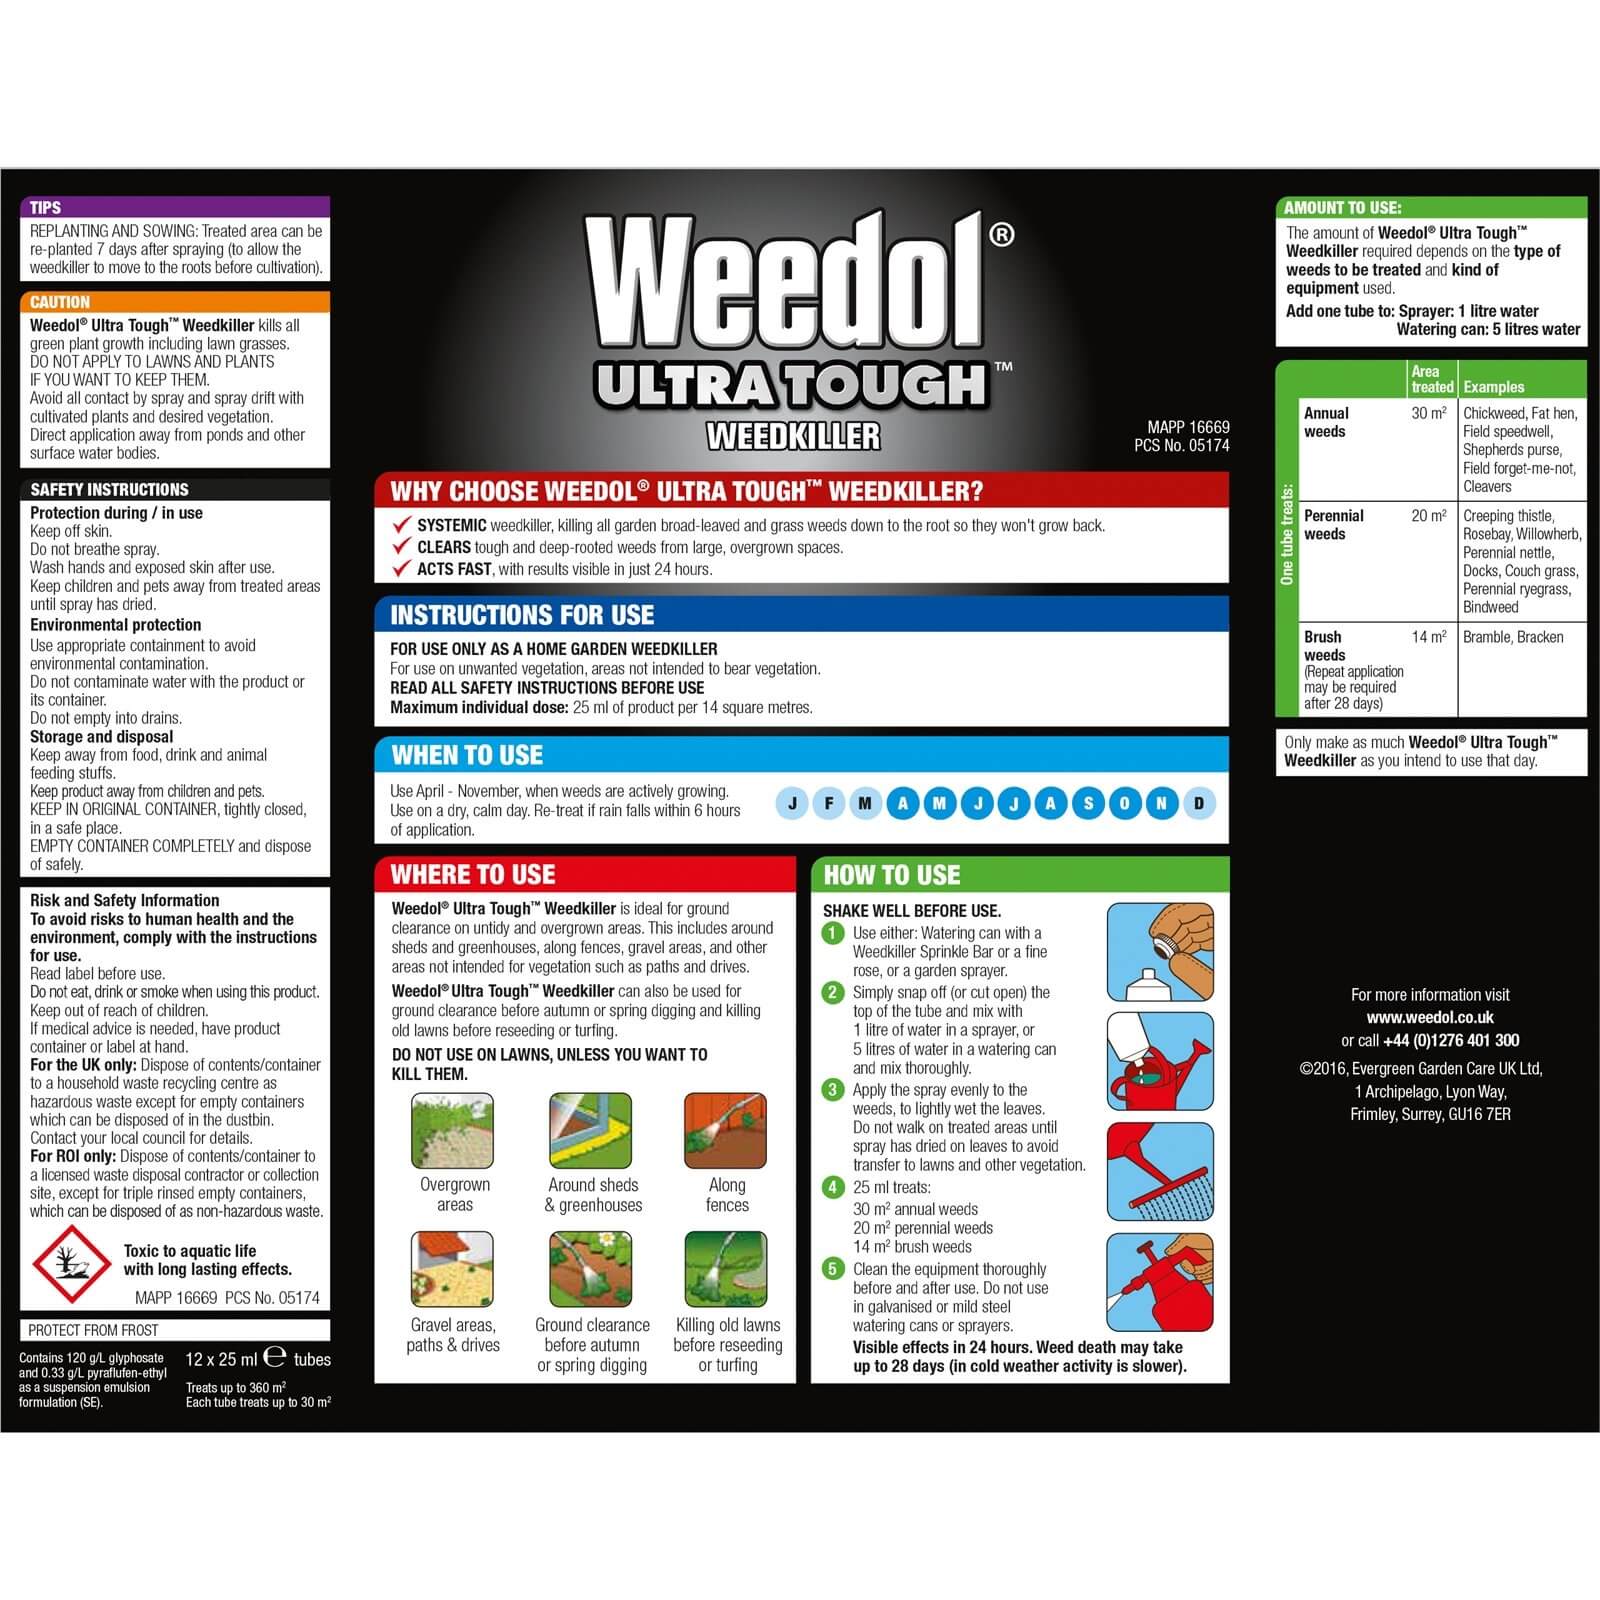 Weedol Ultra Tough Liquid Concentrate Weedkiller - 12 Tubes